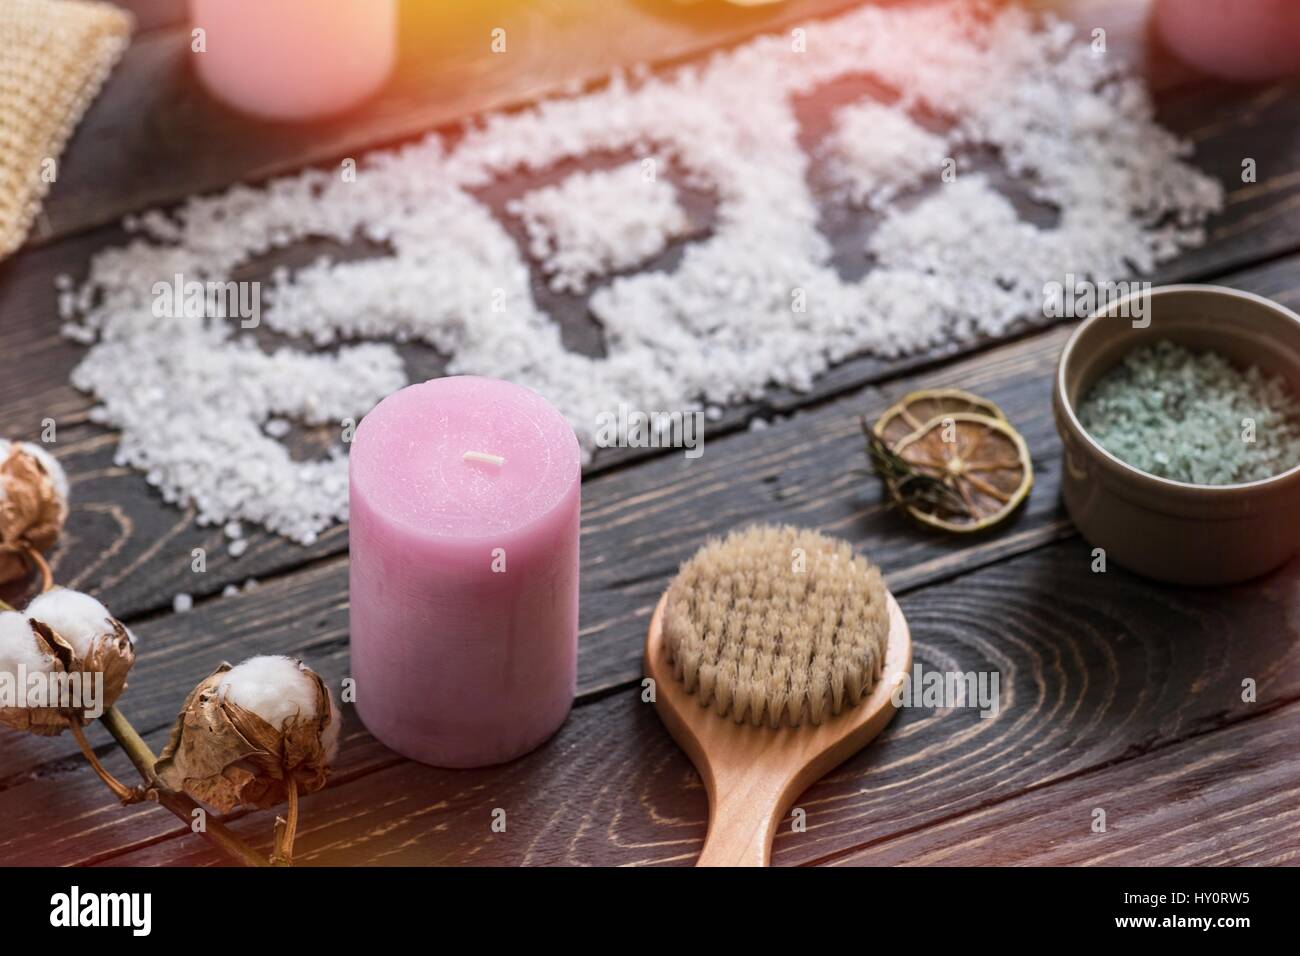 Word SPA with sea salt. Beauty cosmetic products on dark wooden table. Top perspective view. Lighting effects Stock Photo